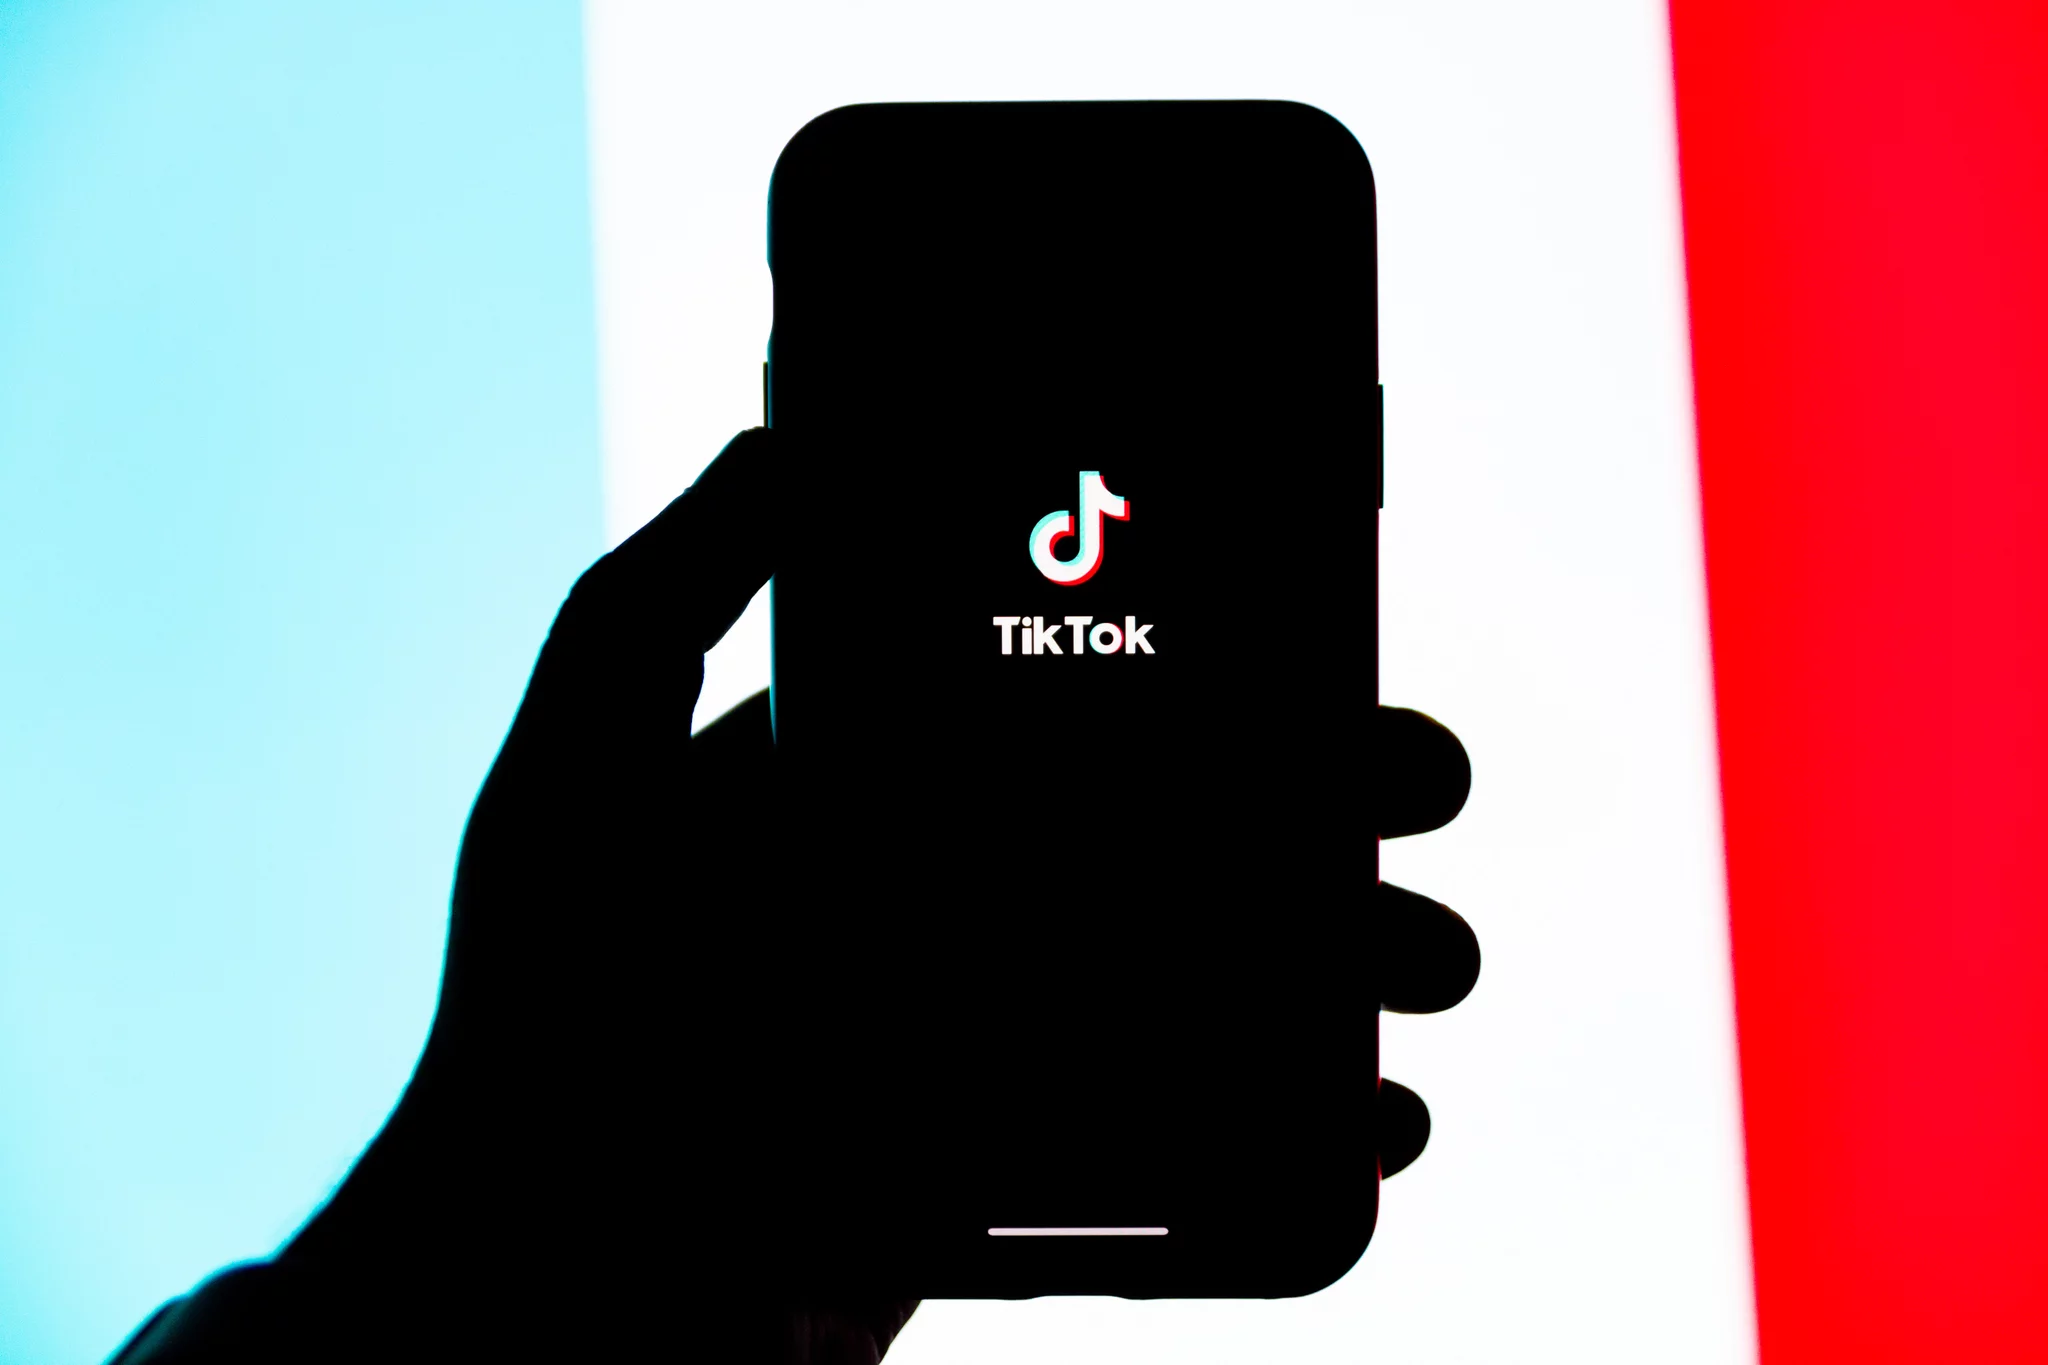 How Do You Get Shadowbanned On TikTok